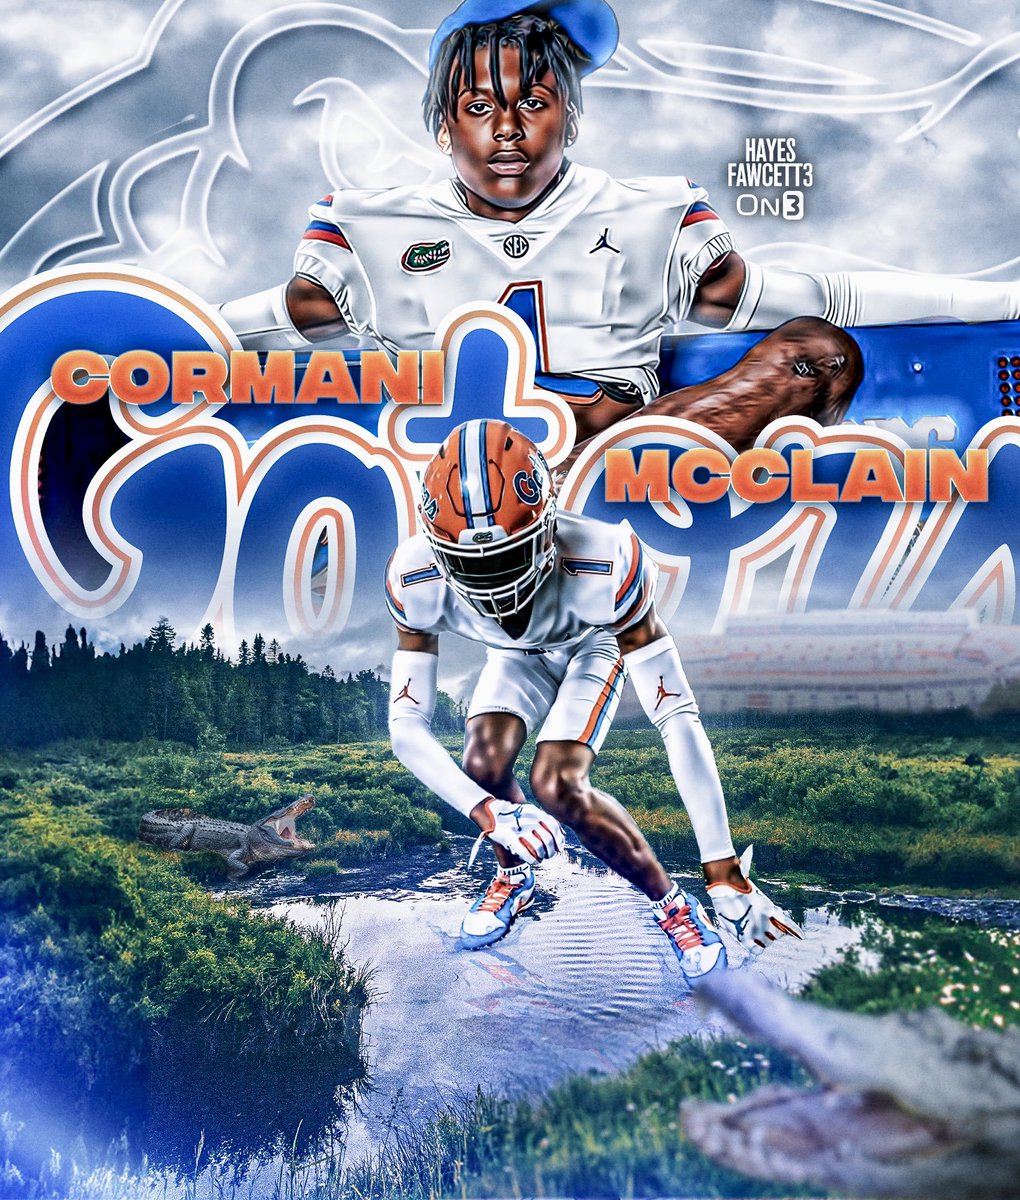 BREAKING: The Gators have landed a commitment from Cormani McClain. 

STORY: on3.com/teams/florida-…